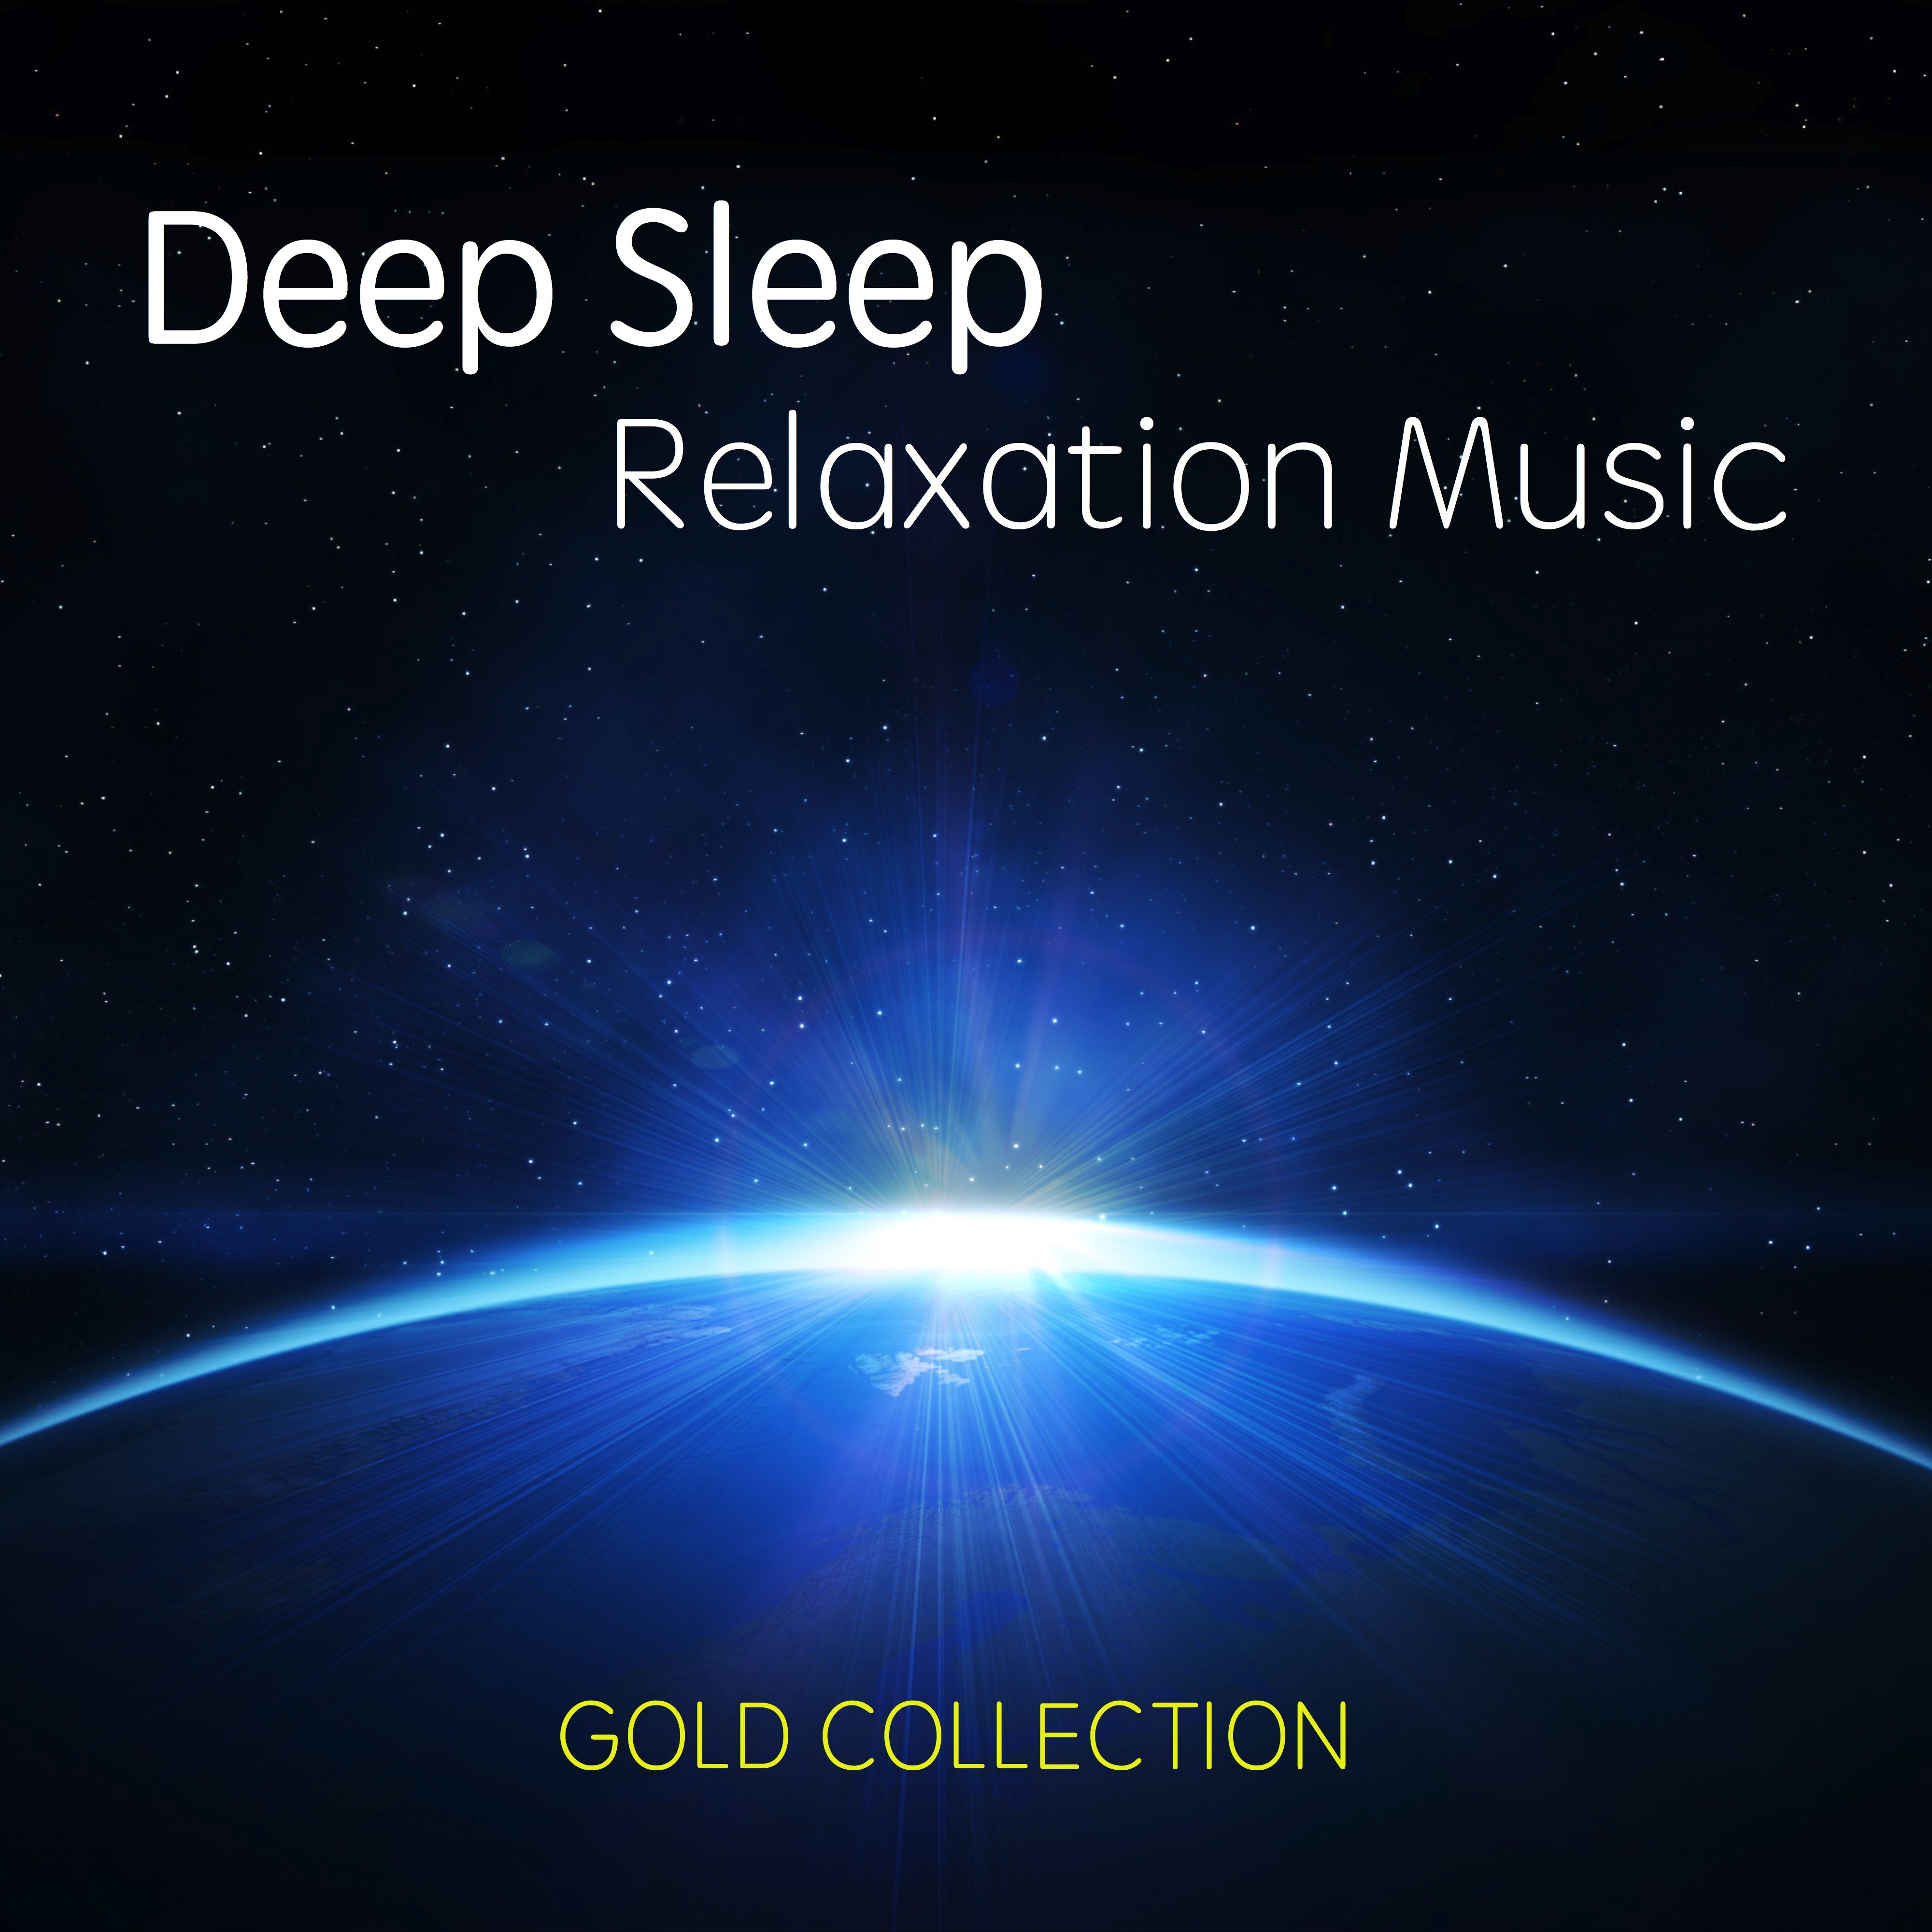 Deep Sleep Relaxation Music Gold Collection: New Age to Relax and Heal Yourself